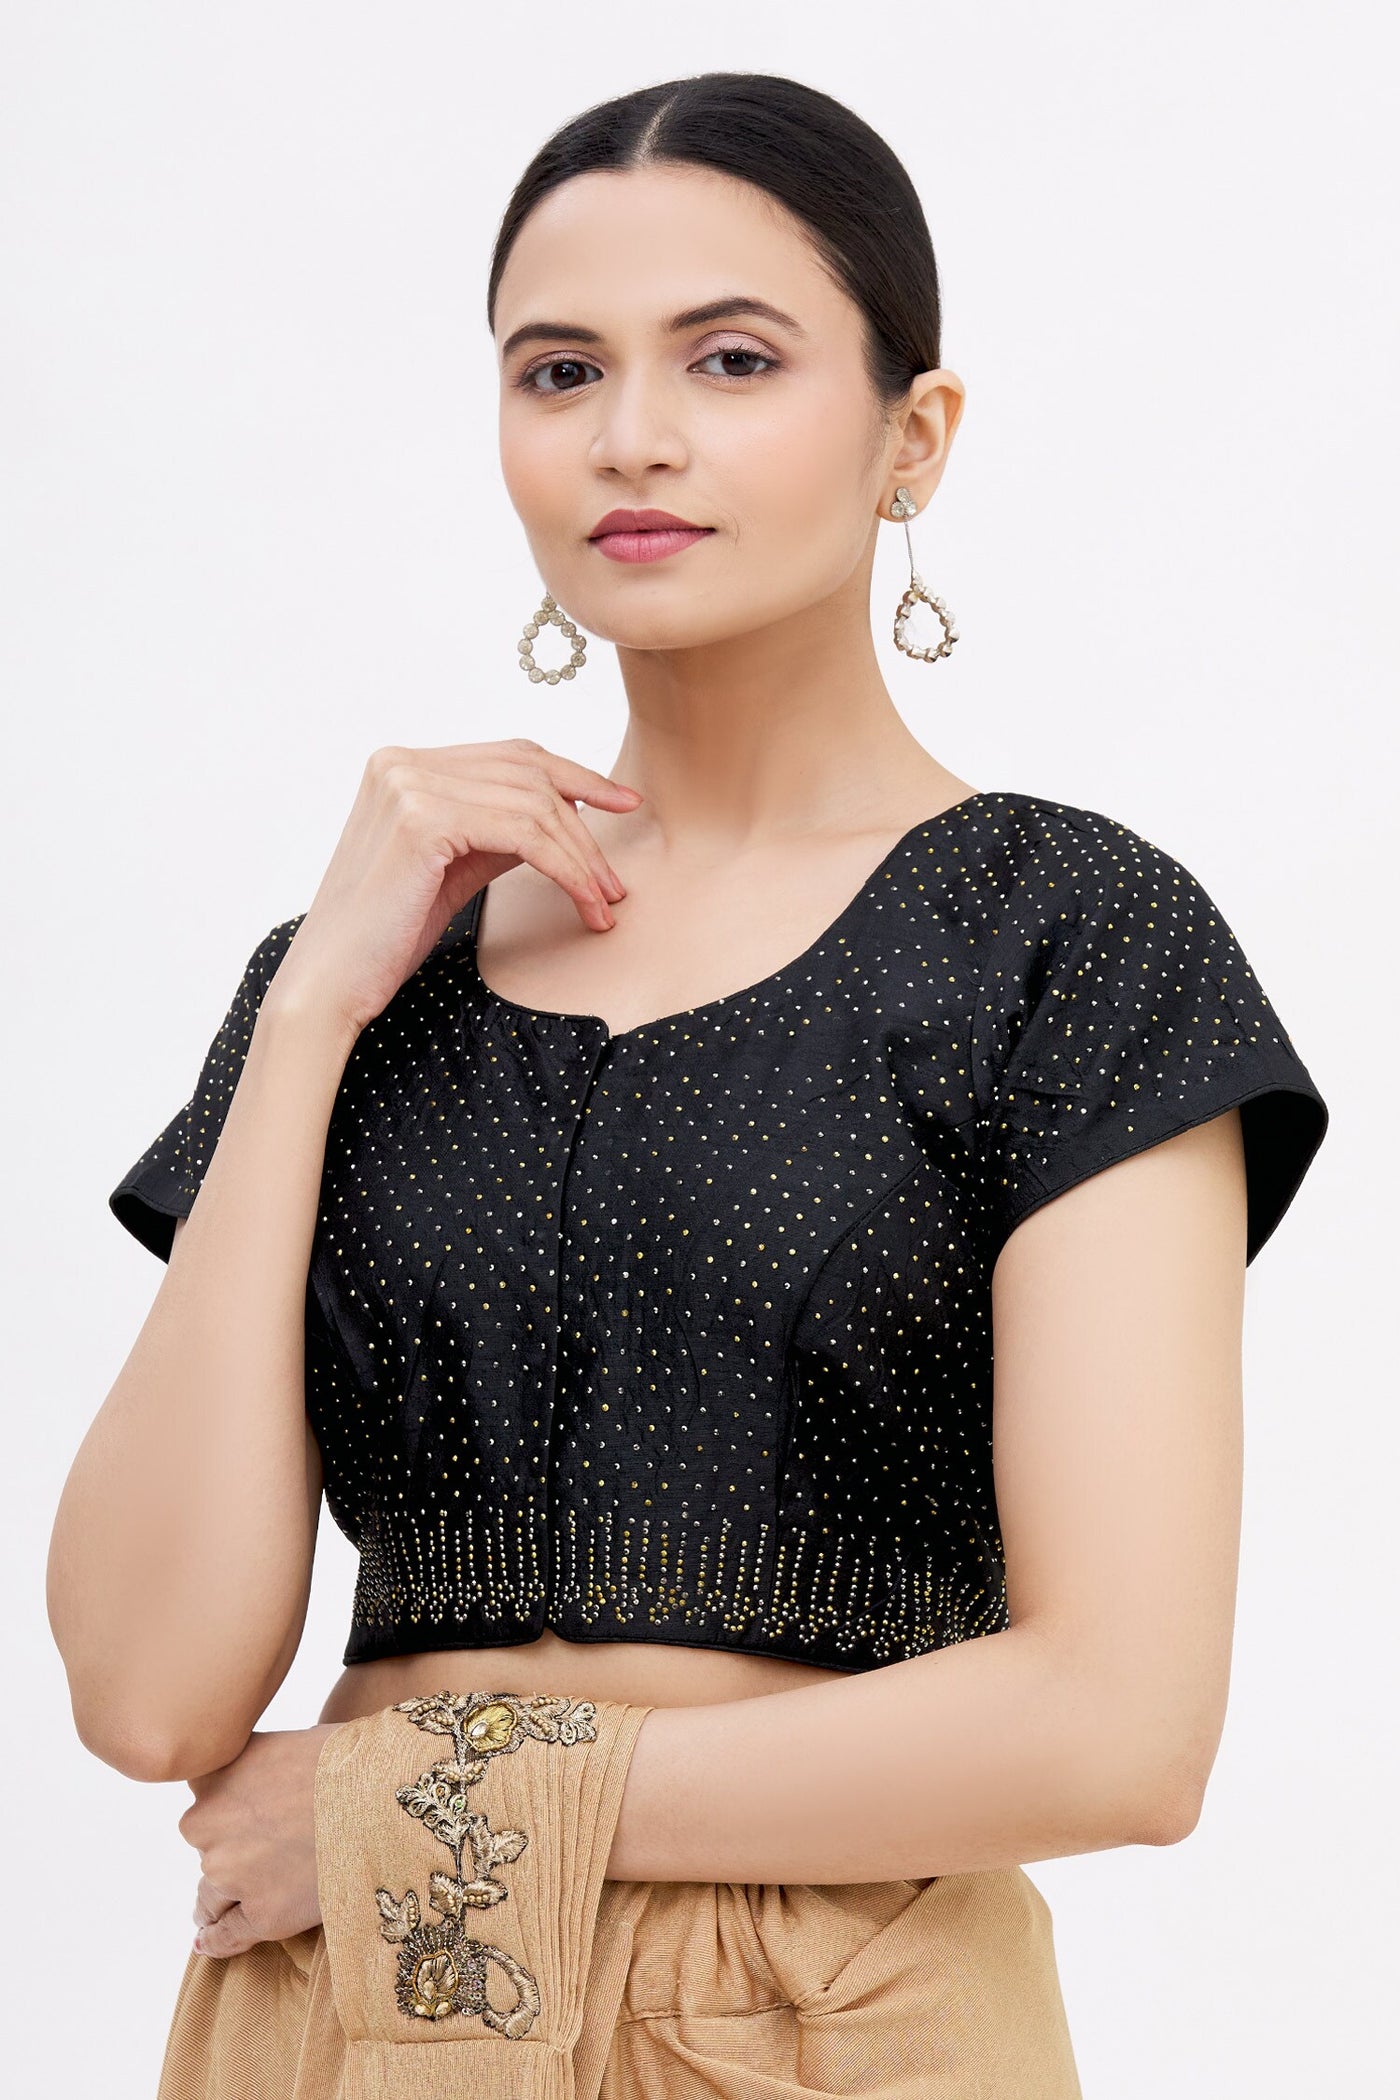 Black Swarovski Saree Blouse Indian Clothing in Denver, CO, Aurora, CO, Boulder, CO, Fort Collins, CO, Colorado Springs, CO, Parker, CO, Highlands Ranch, CO, Cherry Creek, CO, Centennial, CO, and Longmont, CO. NATIONWIDE SHIPPING USA- India Fashion X